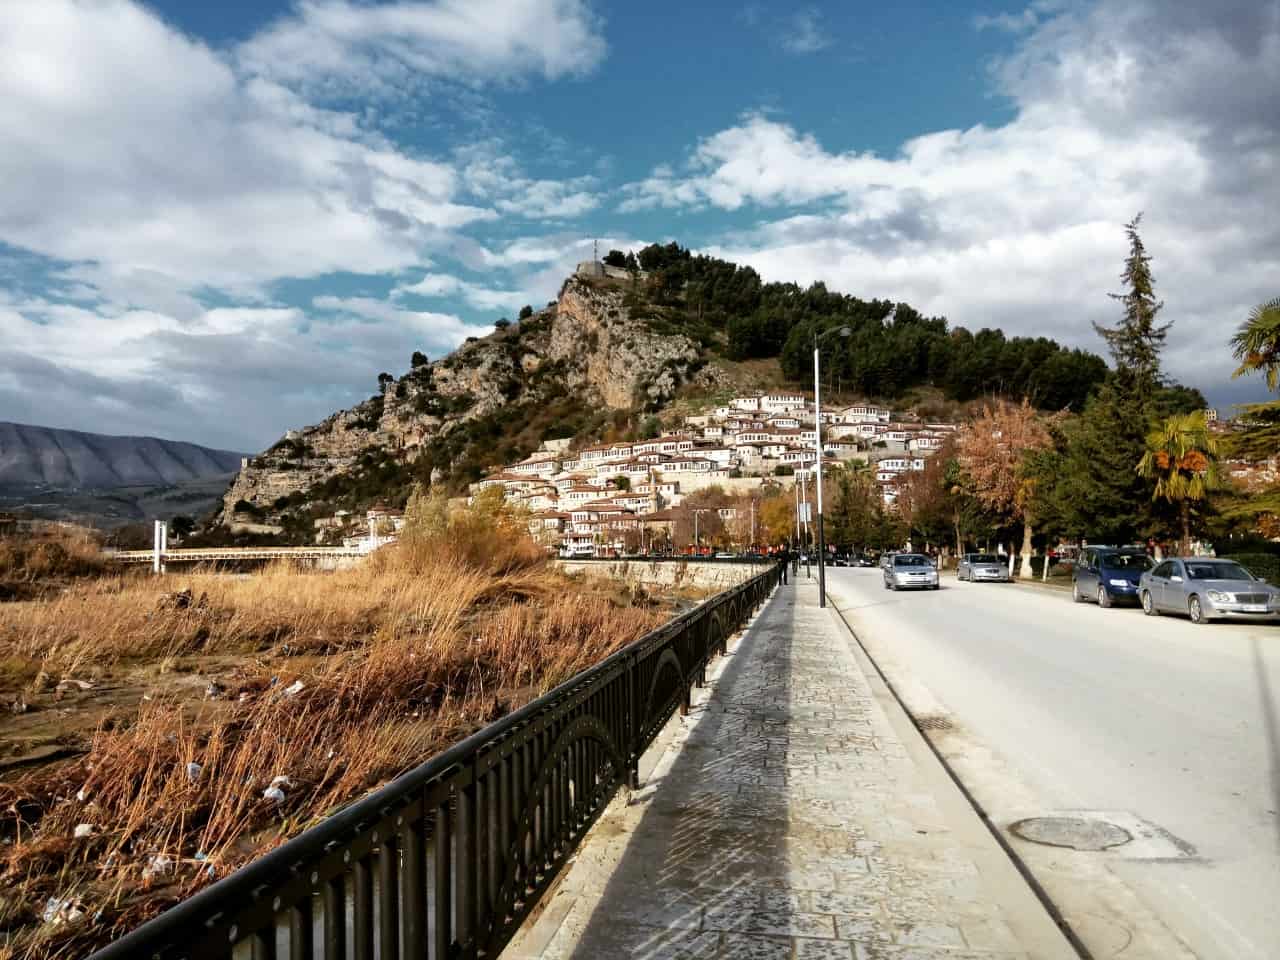 Best things to do in Berat Albania - Luciana Fani - Mangalem - Olt town